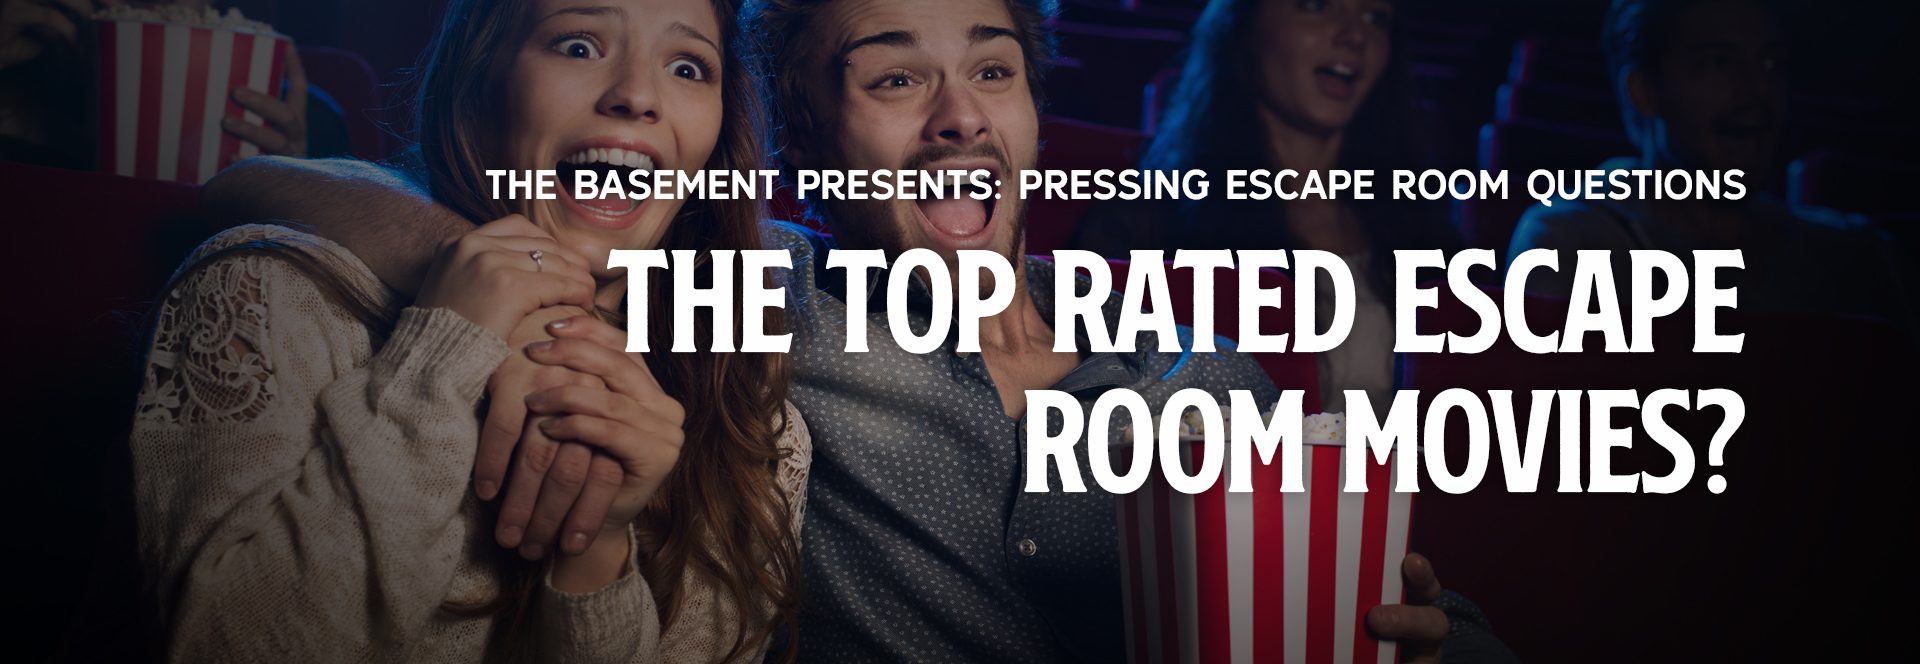 Top Rated Escape Room Movies